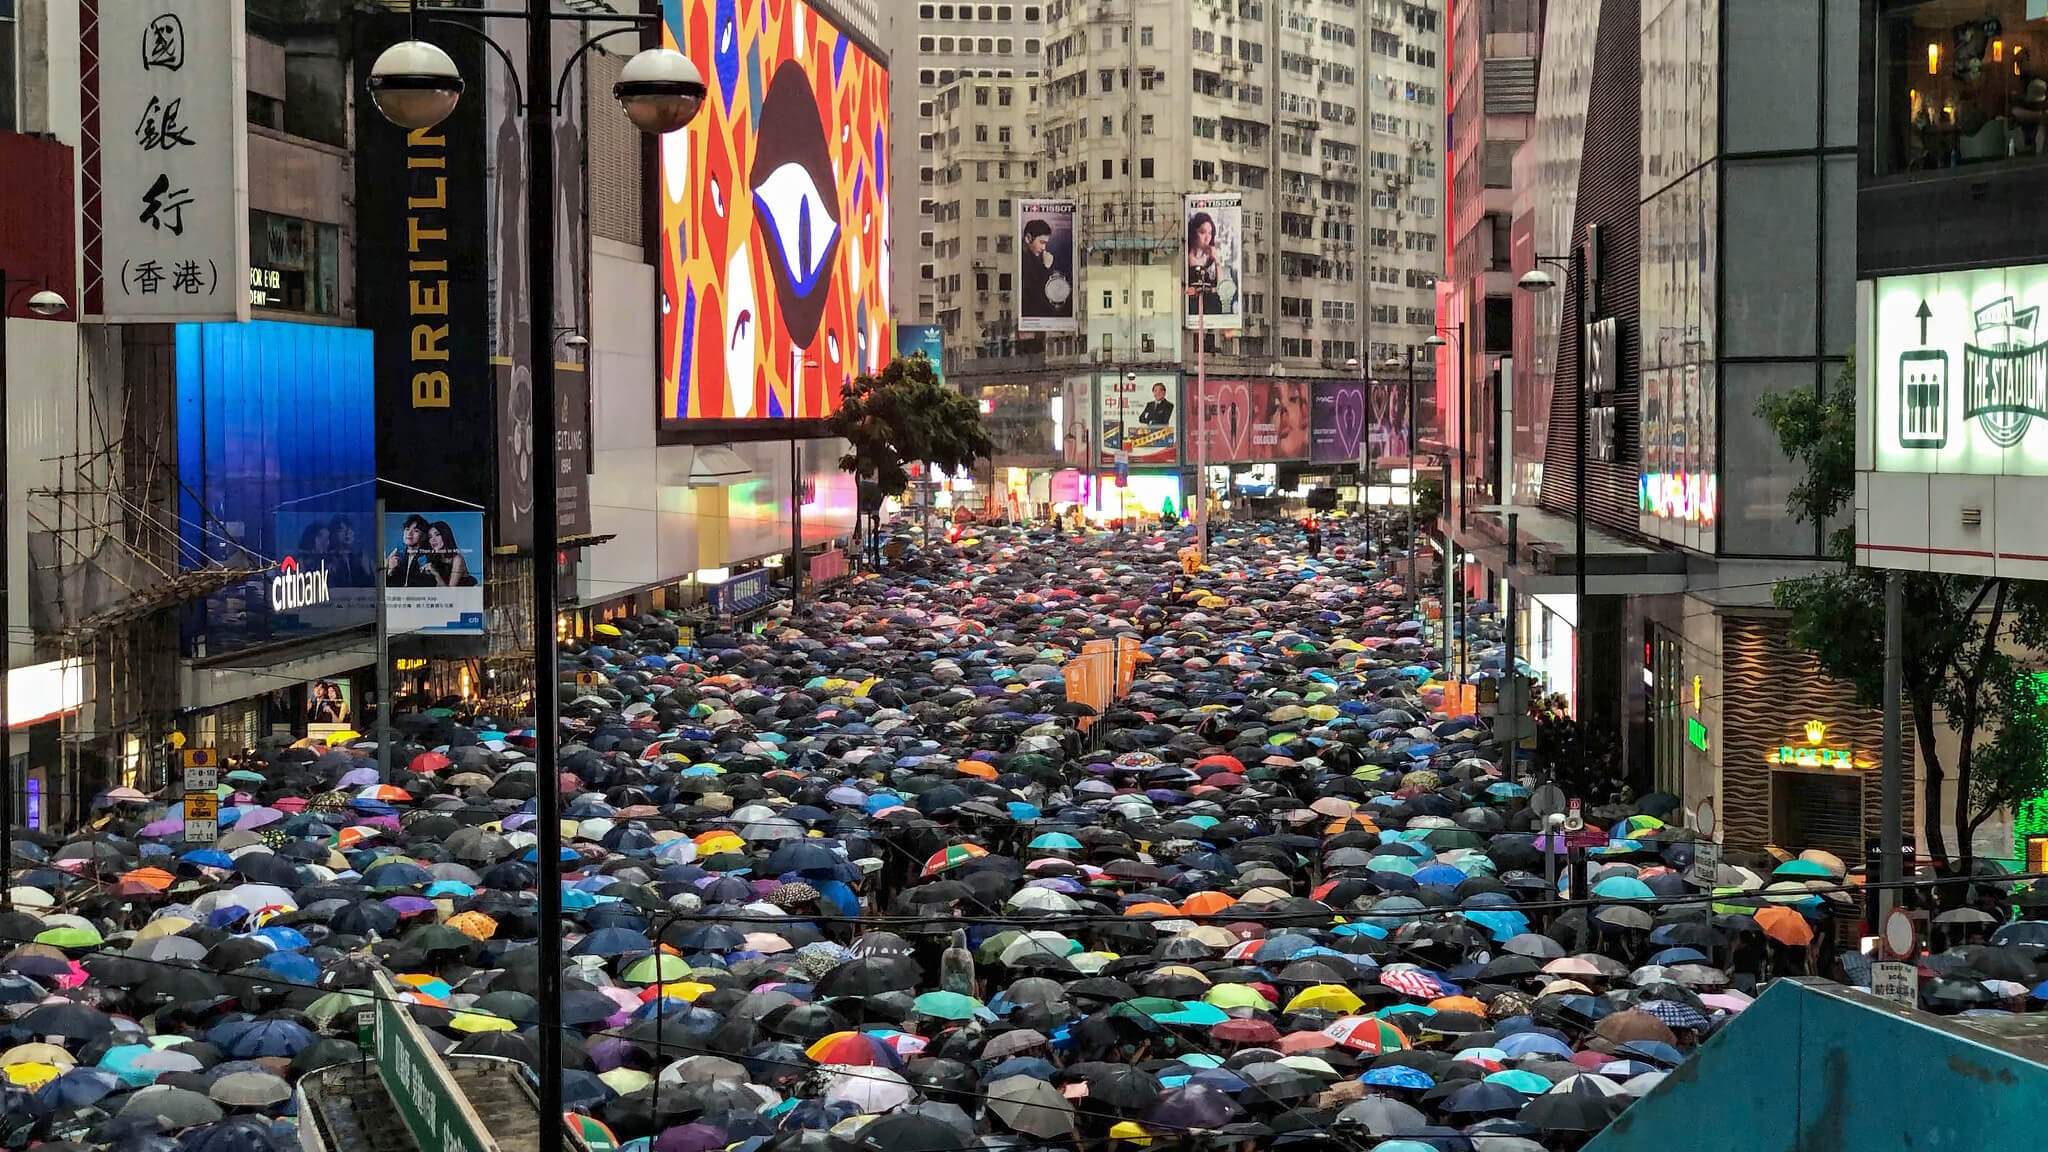 Hong Kong anti-extradition bill protest, 20 August 2019. © Studio Incendo / Flickr